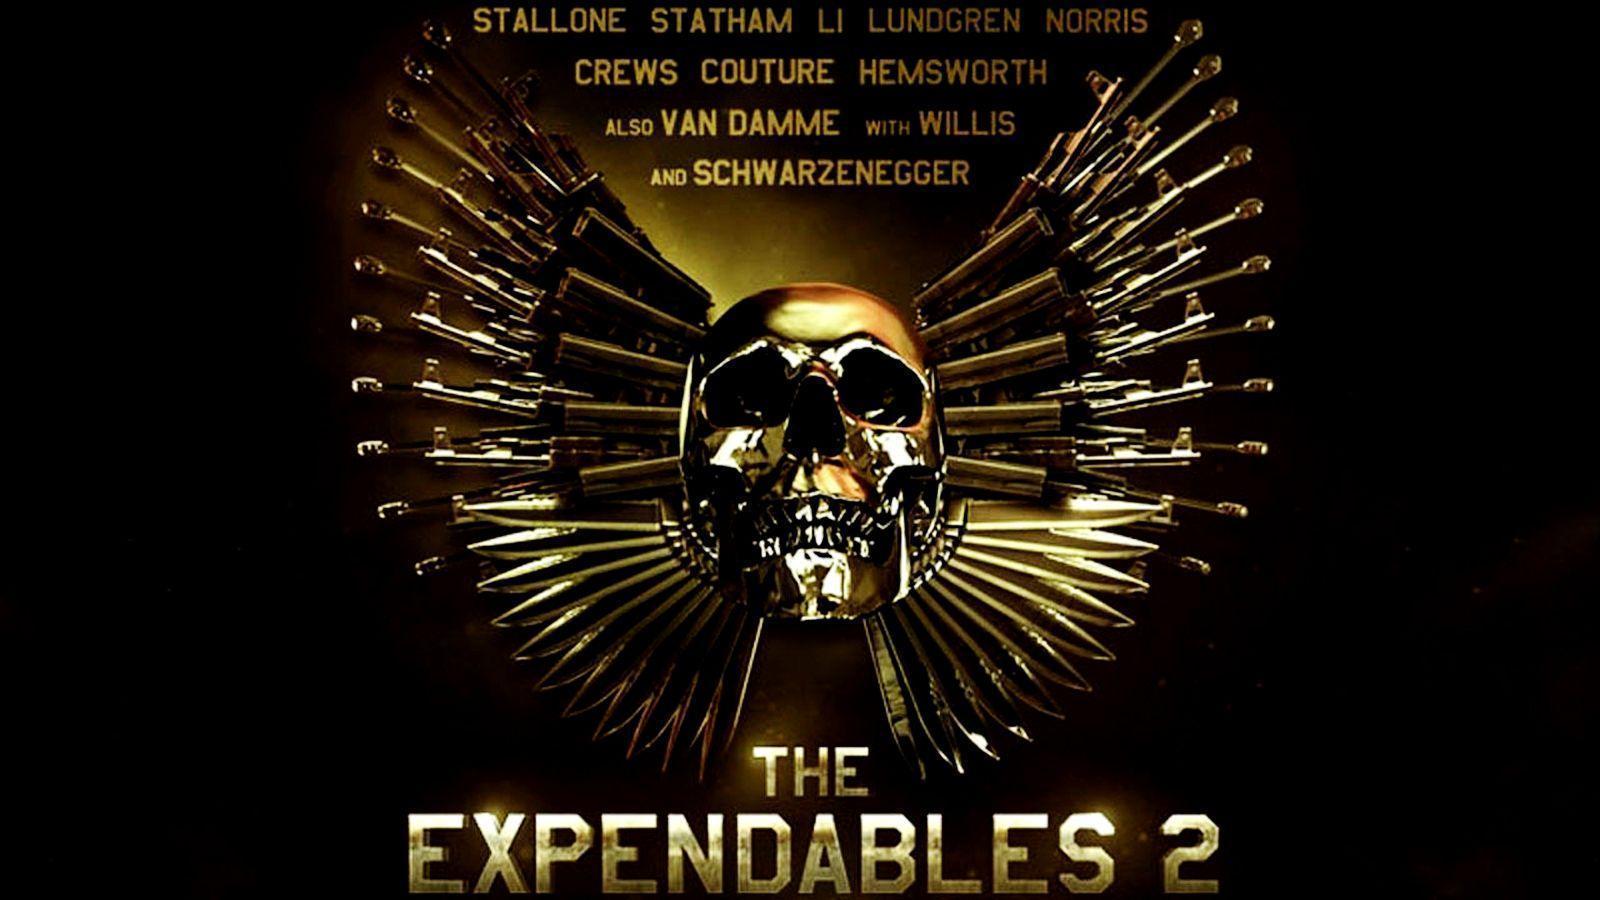 THE EXPENDABLES 2 POSTERS HD WALLPAPERS For Windows 7